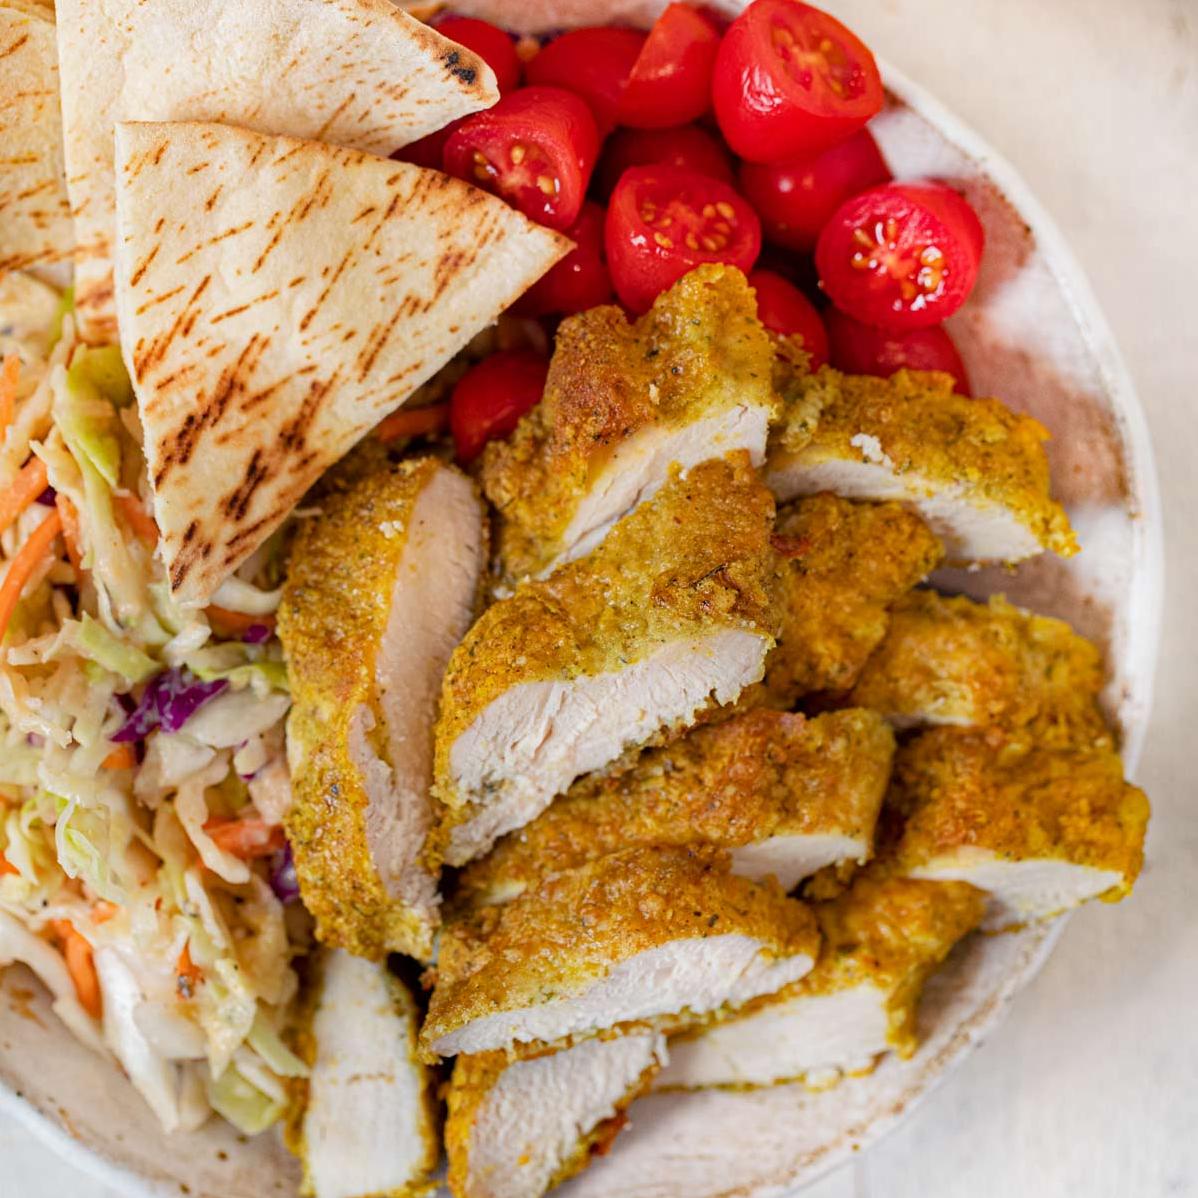 A Unique Twist on Classic Chicken with Falafel Crust